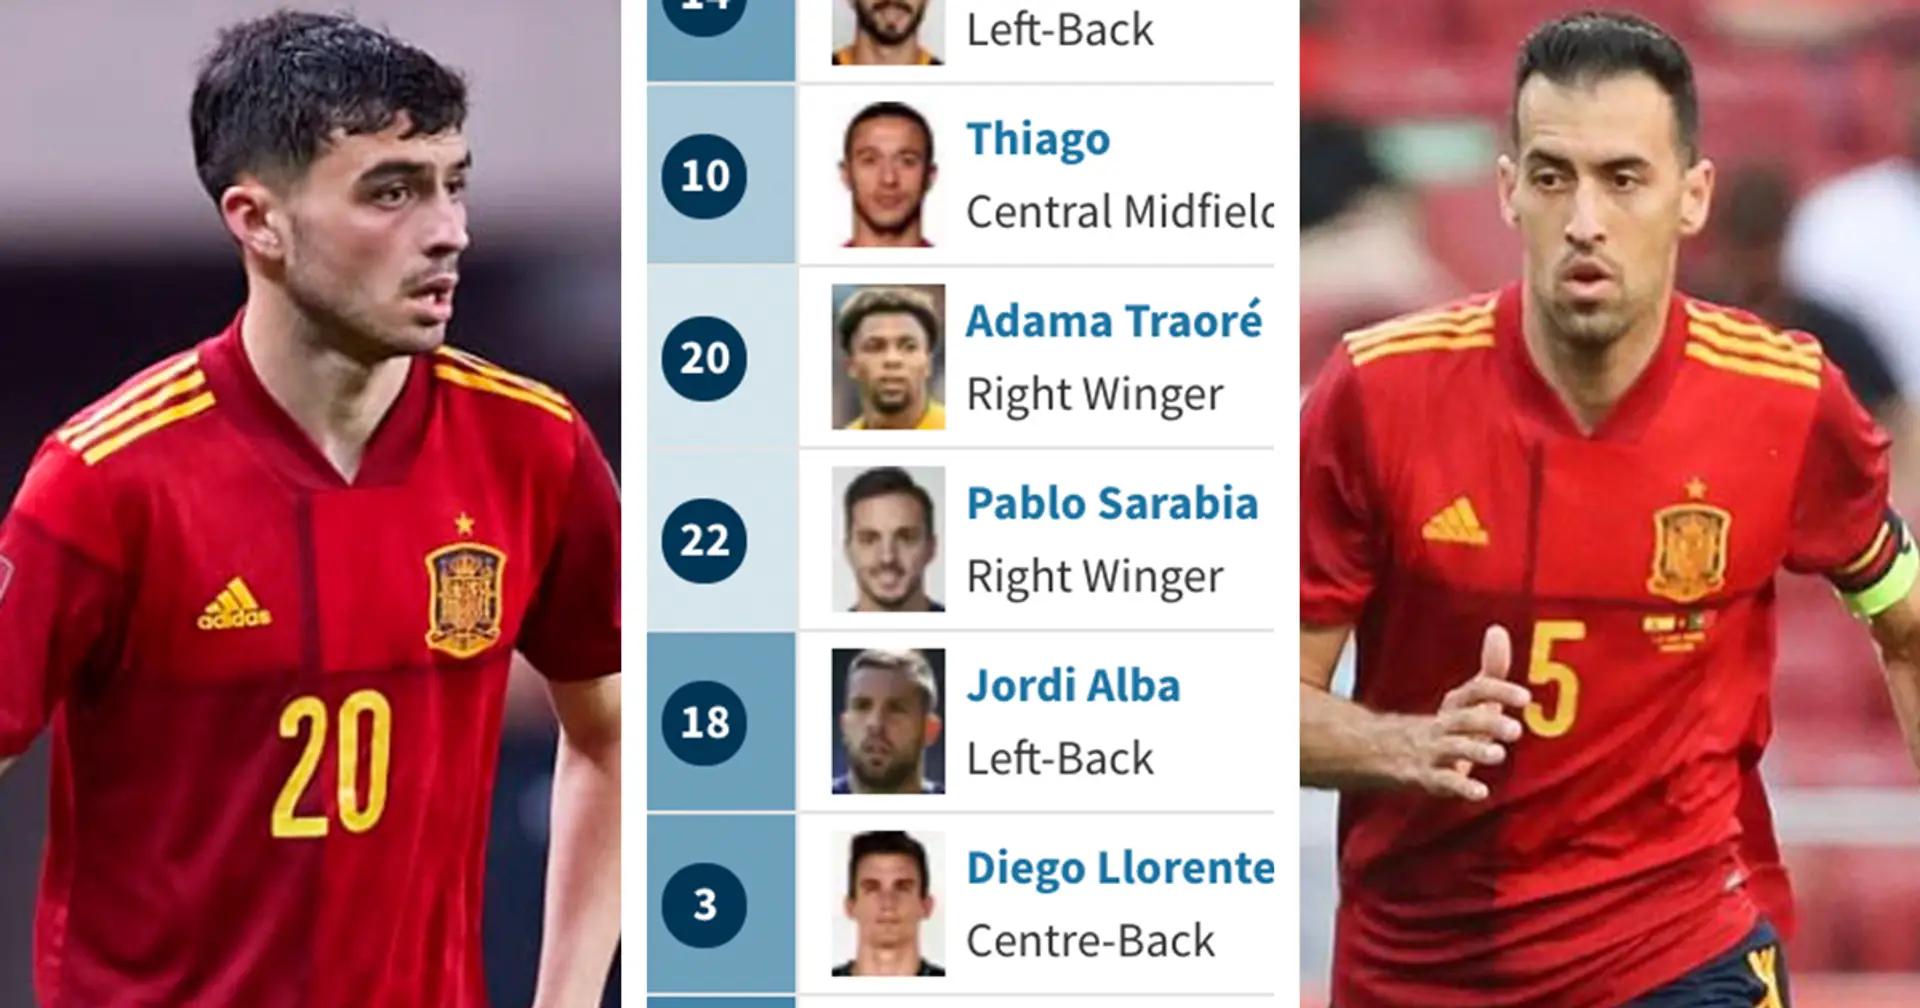 Pedri in top 5 most expensive footballers in Spain squad for Euro 2020, Busquets almost bottom